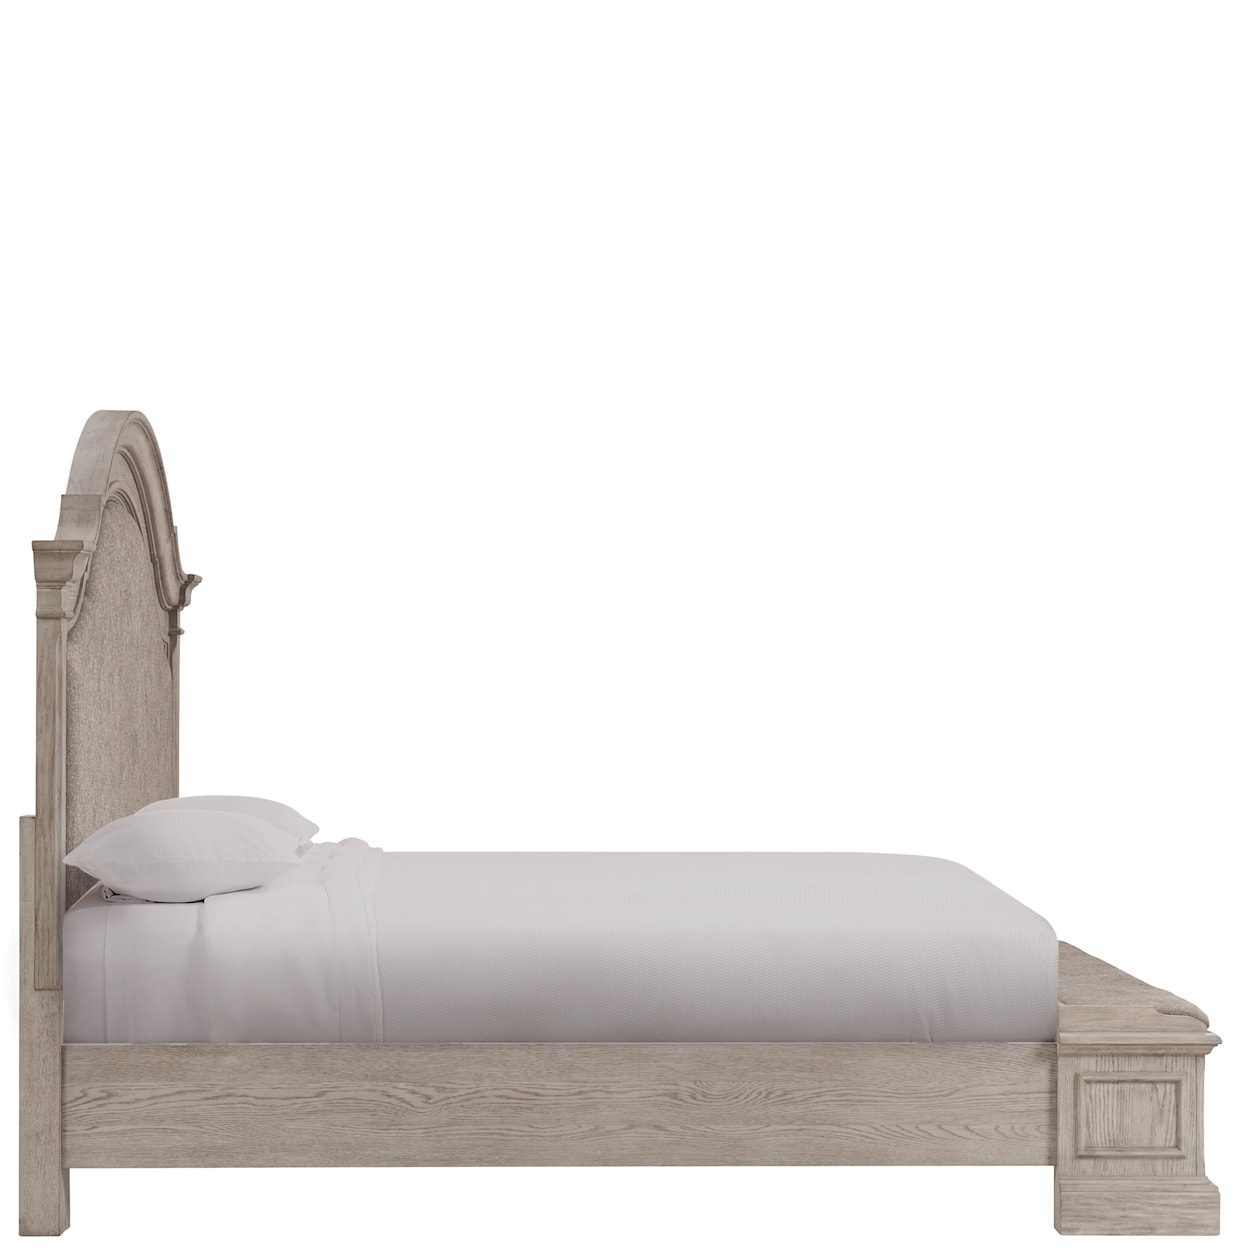 Riverside Furniture Anniston Queen Arched Panel Bed